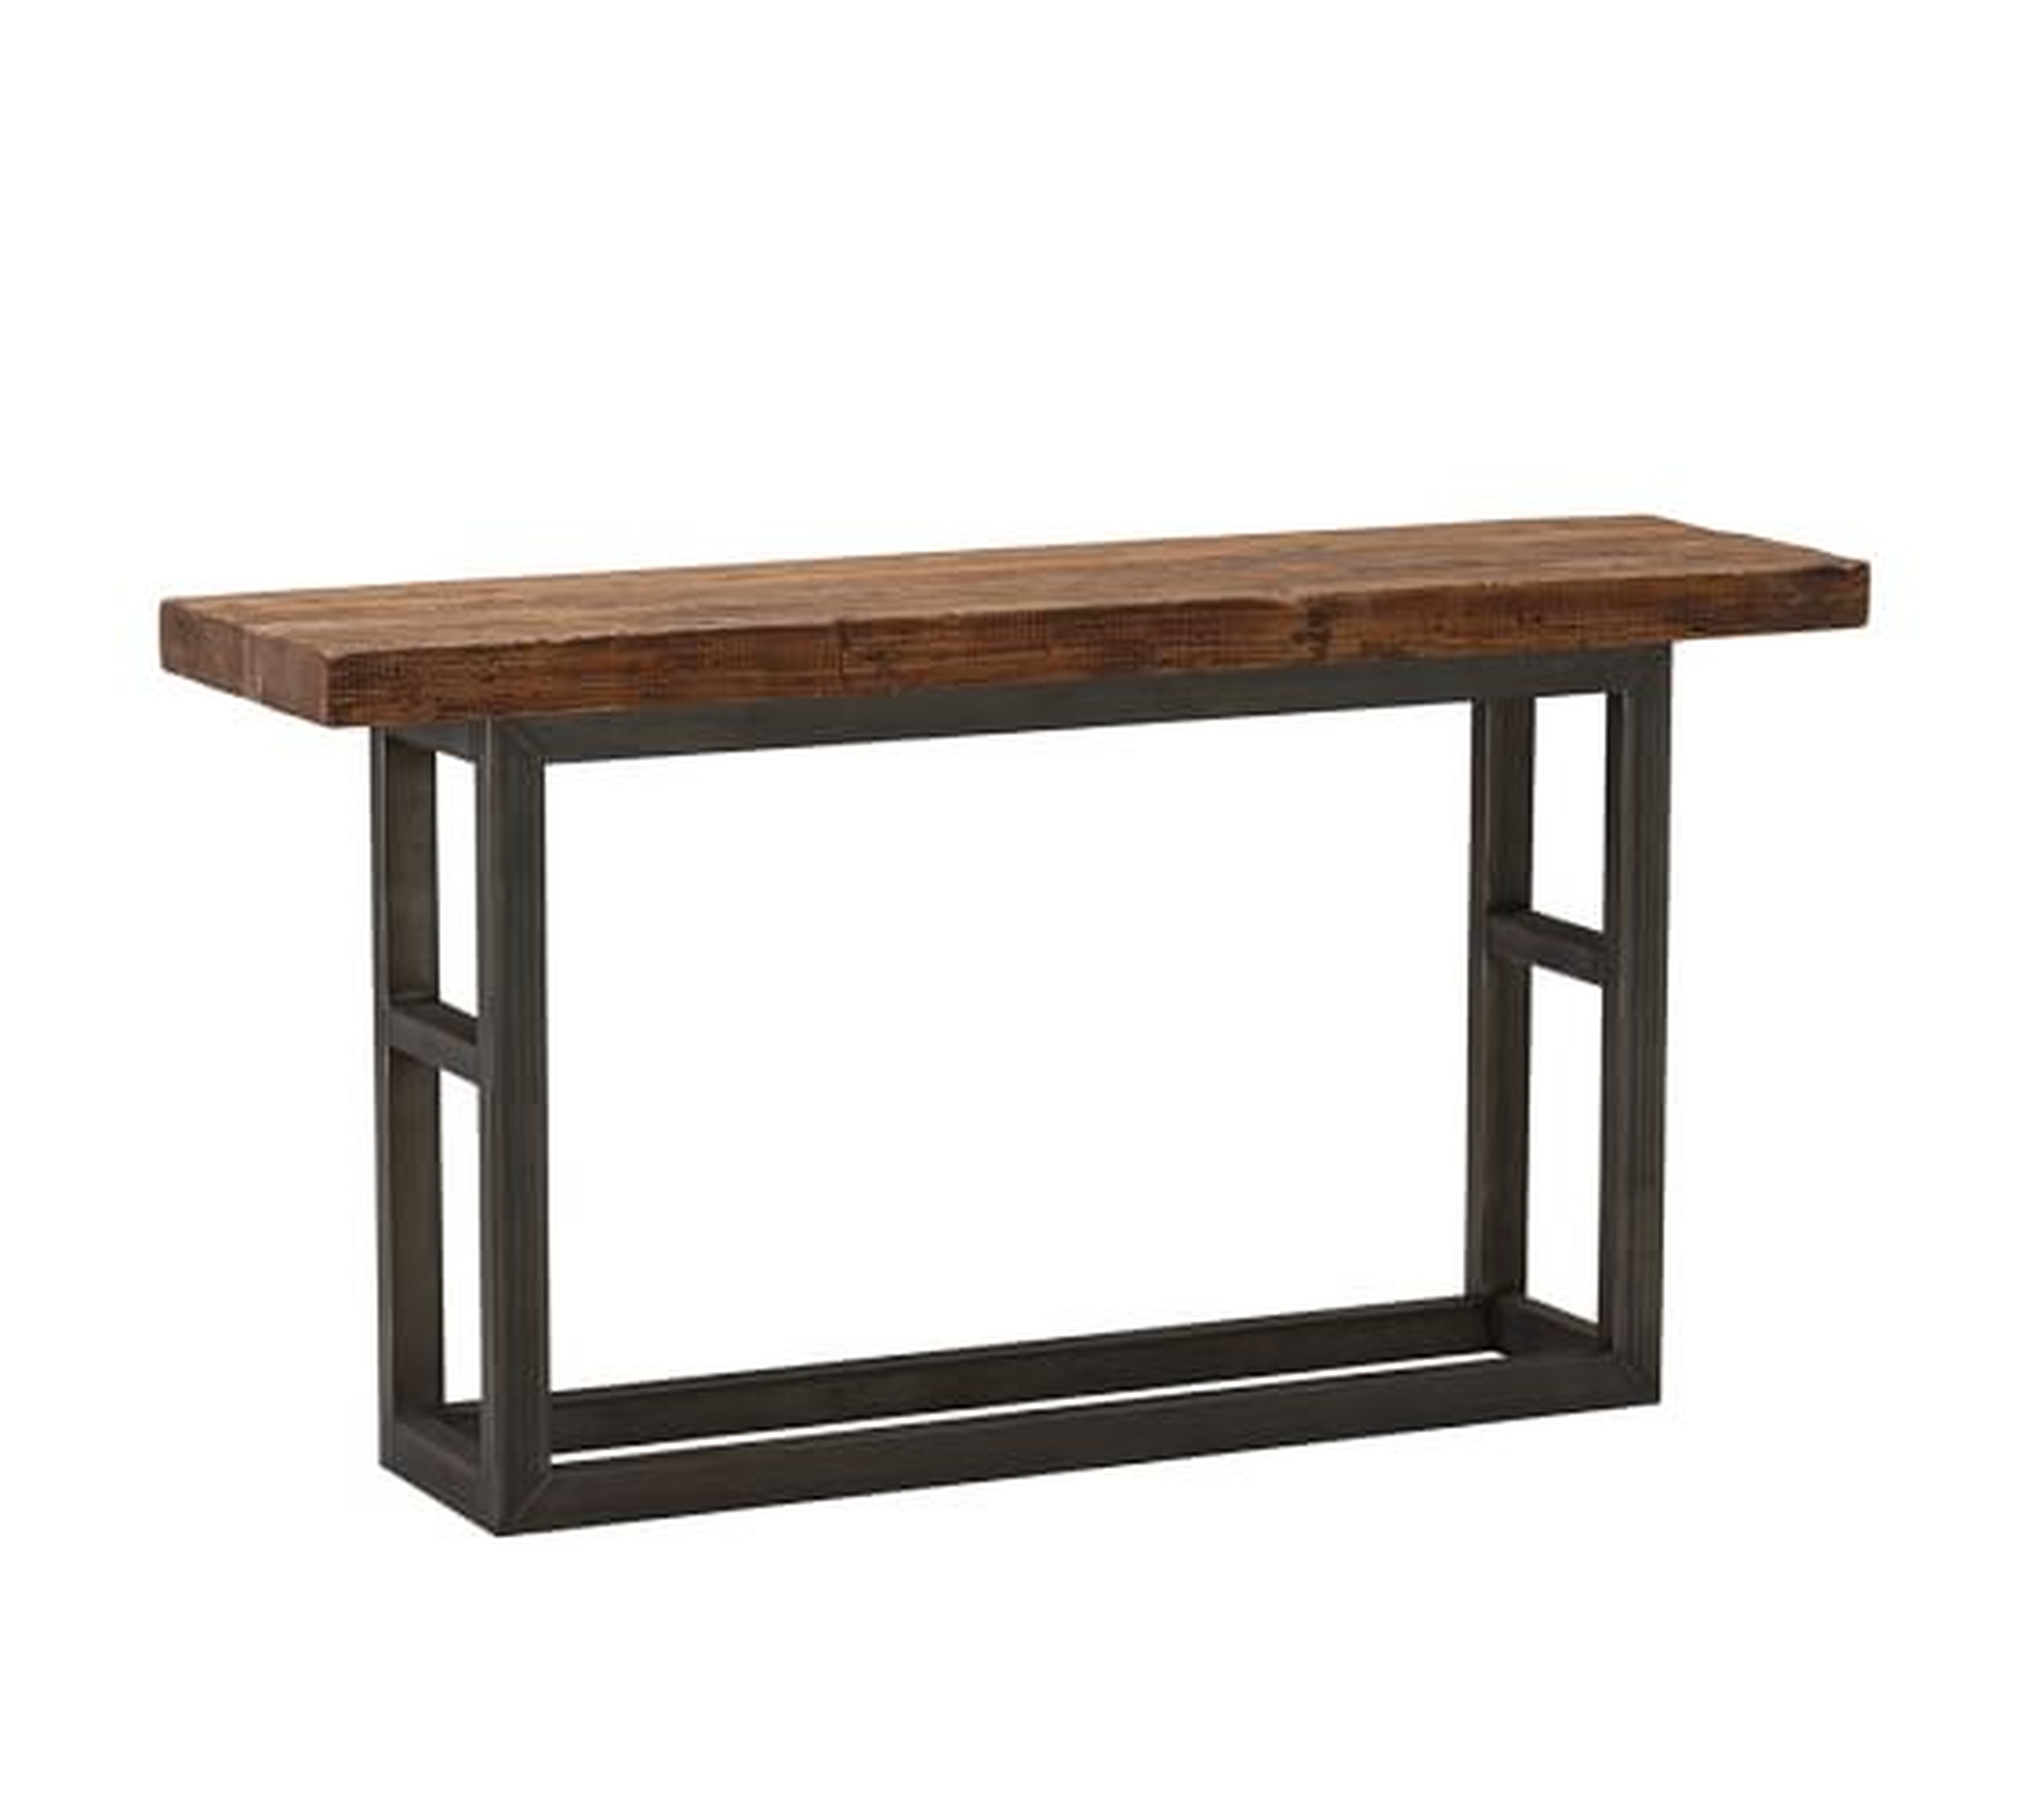 GRIFFIN RECLAIMED WOOD CONSOLE TABLE - Pottery Barn